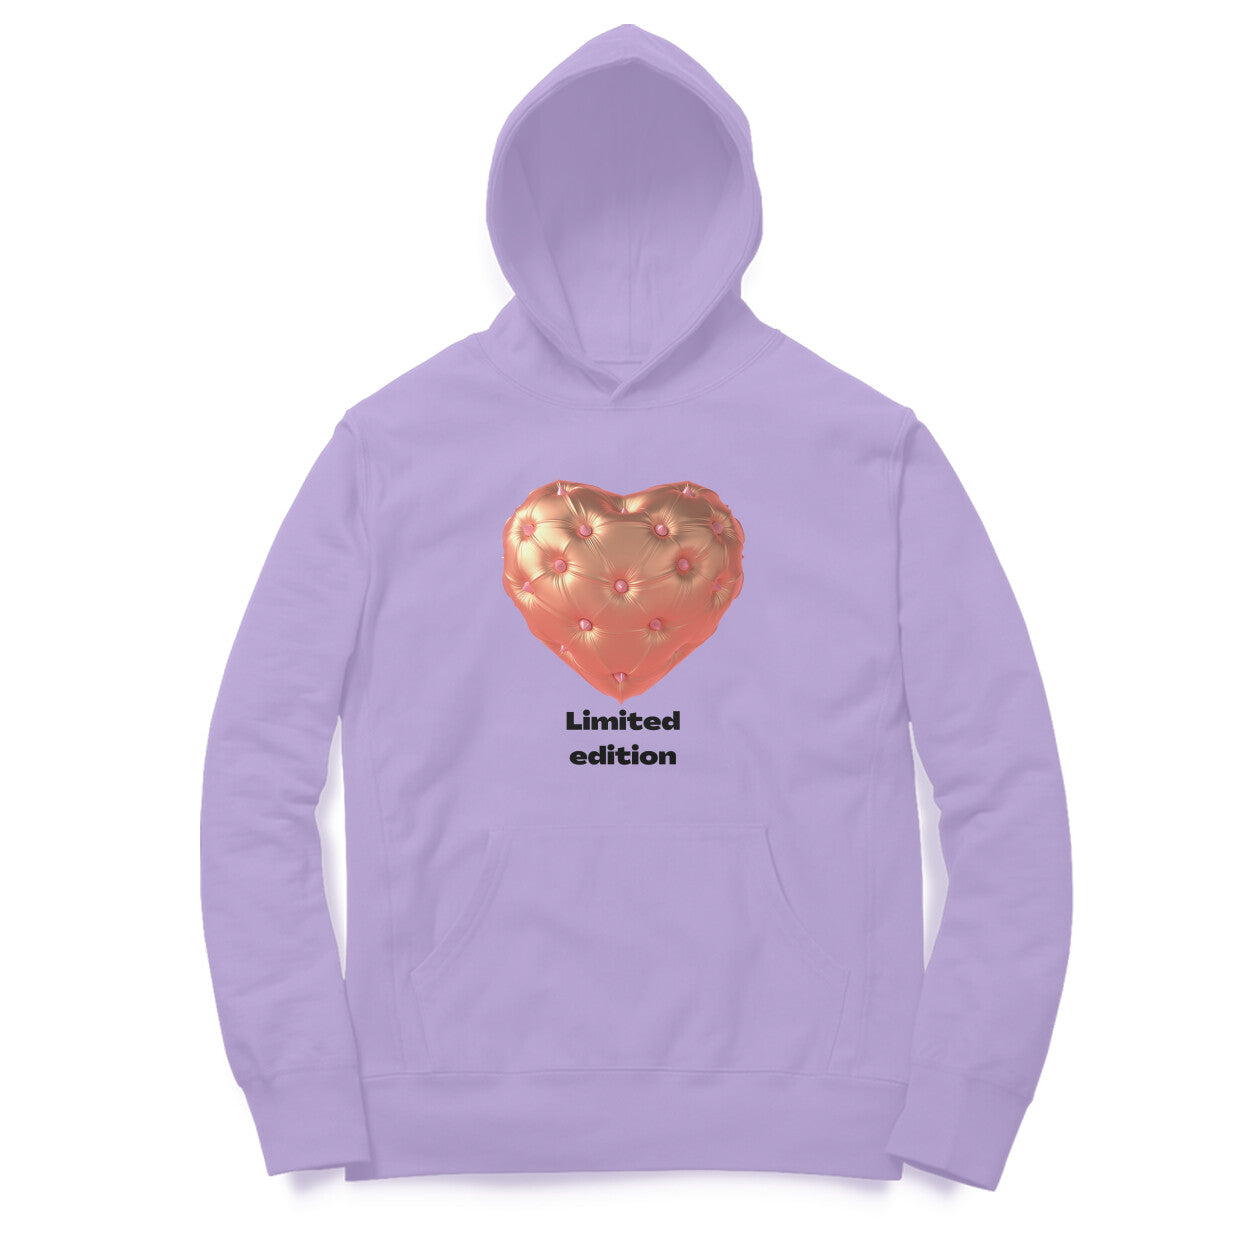 Limited edition- Hoodie